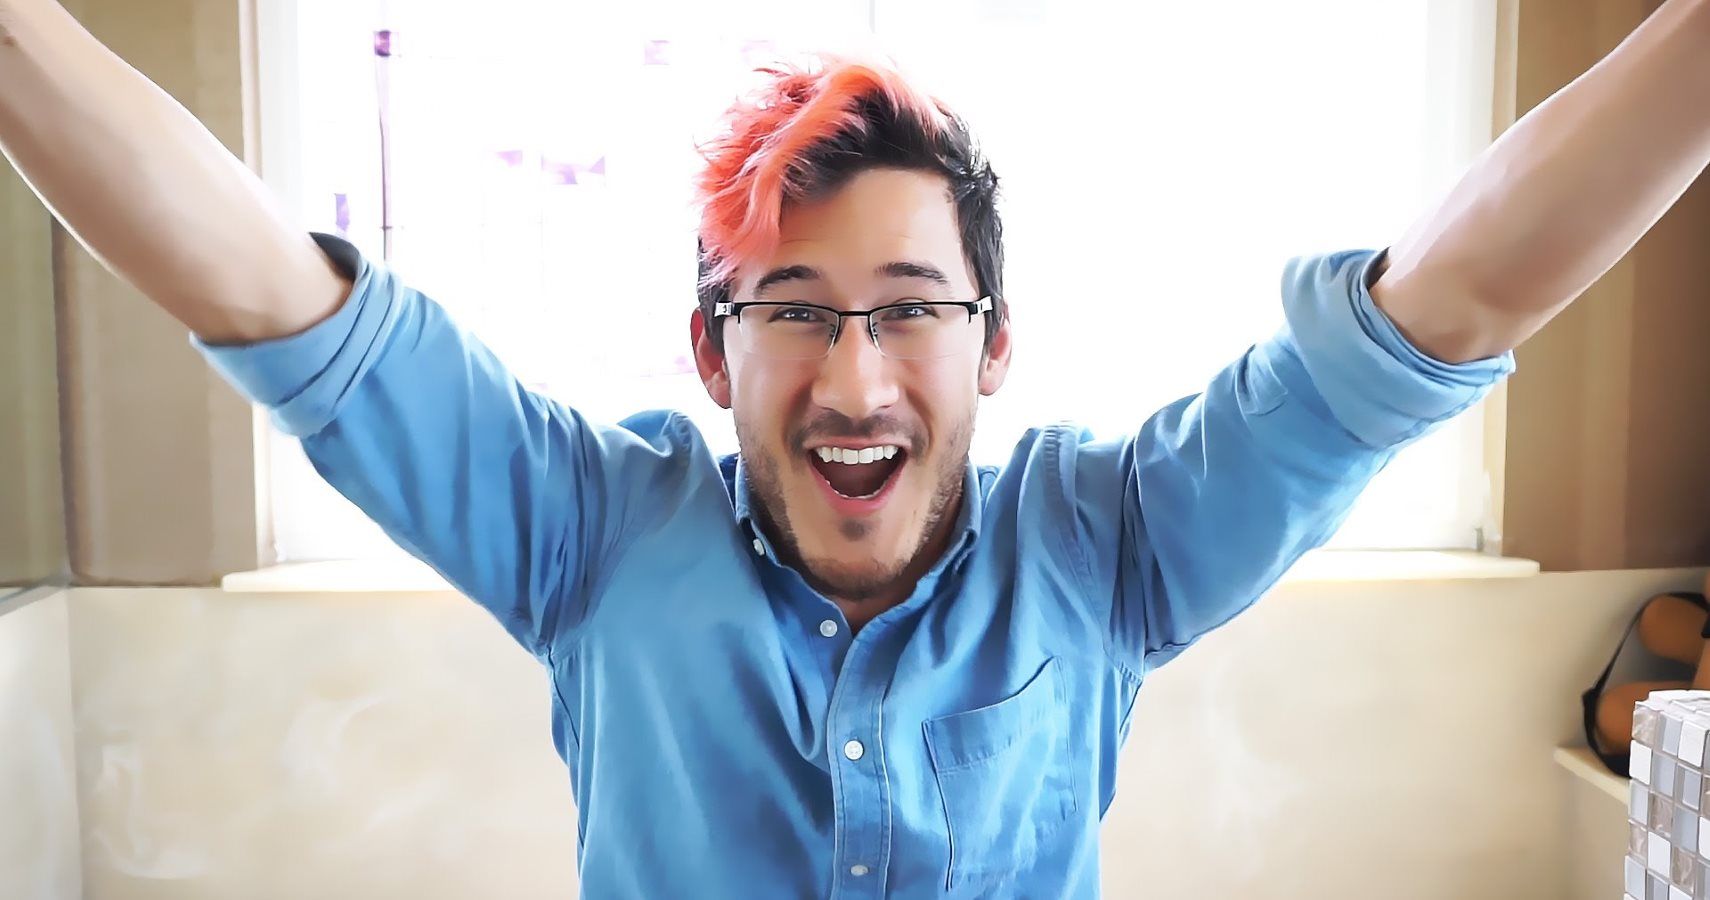 Markiplier Is Worth About 24 Million Says Its More Than I Deserve